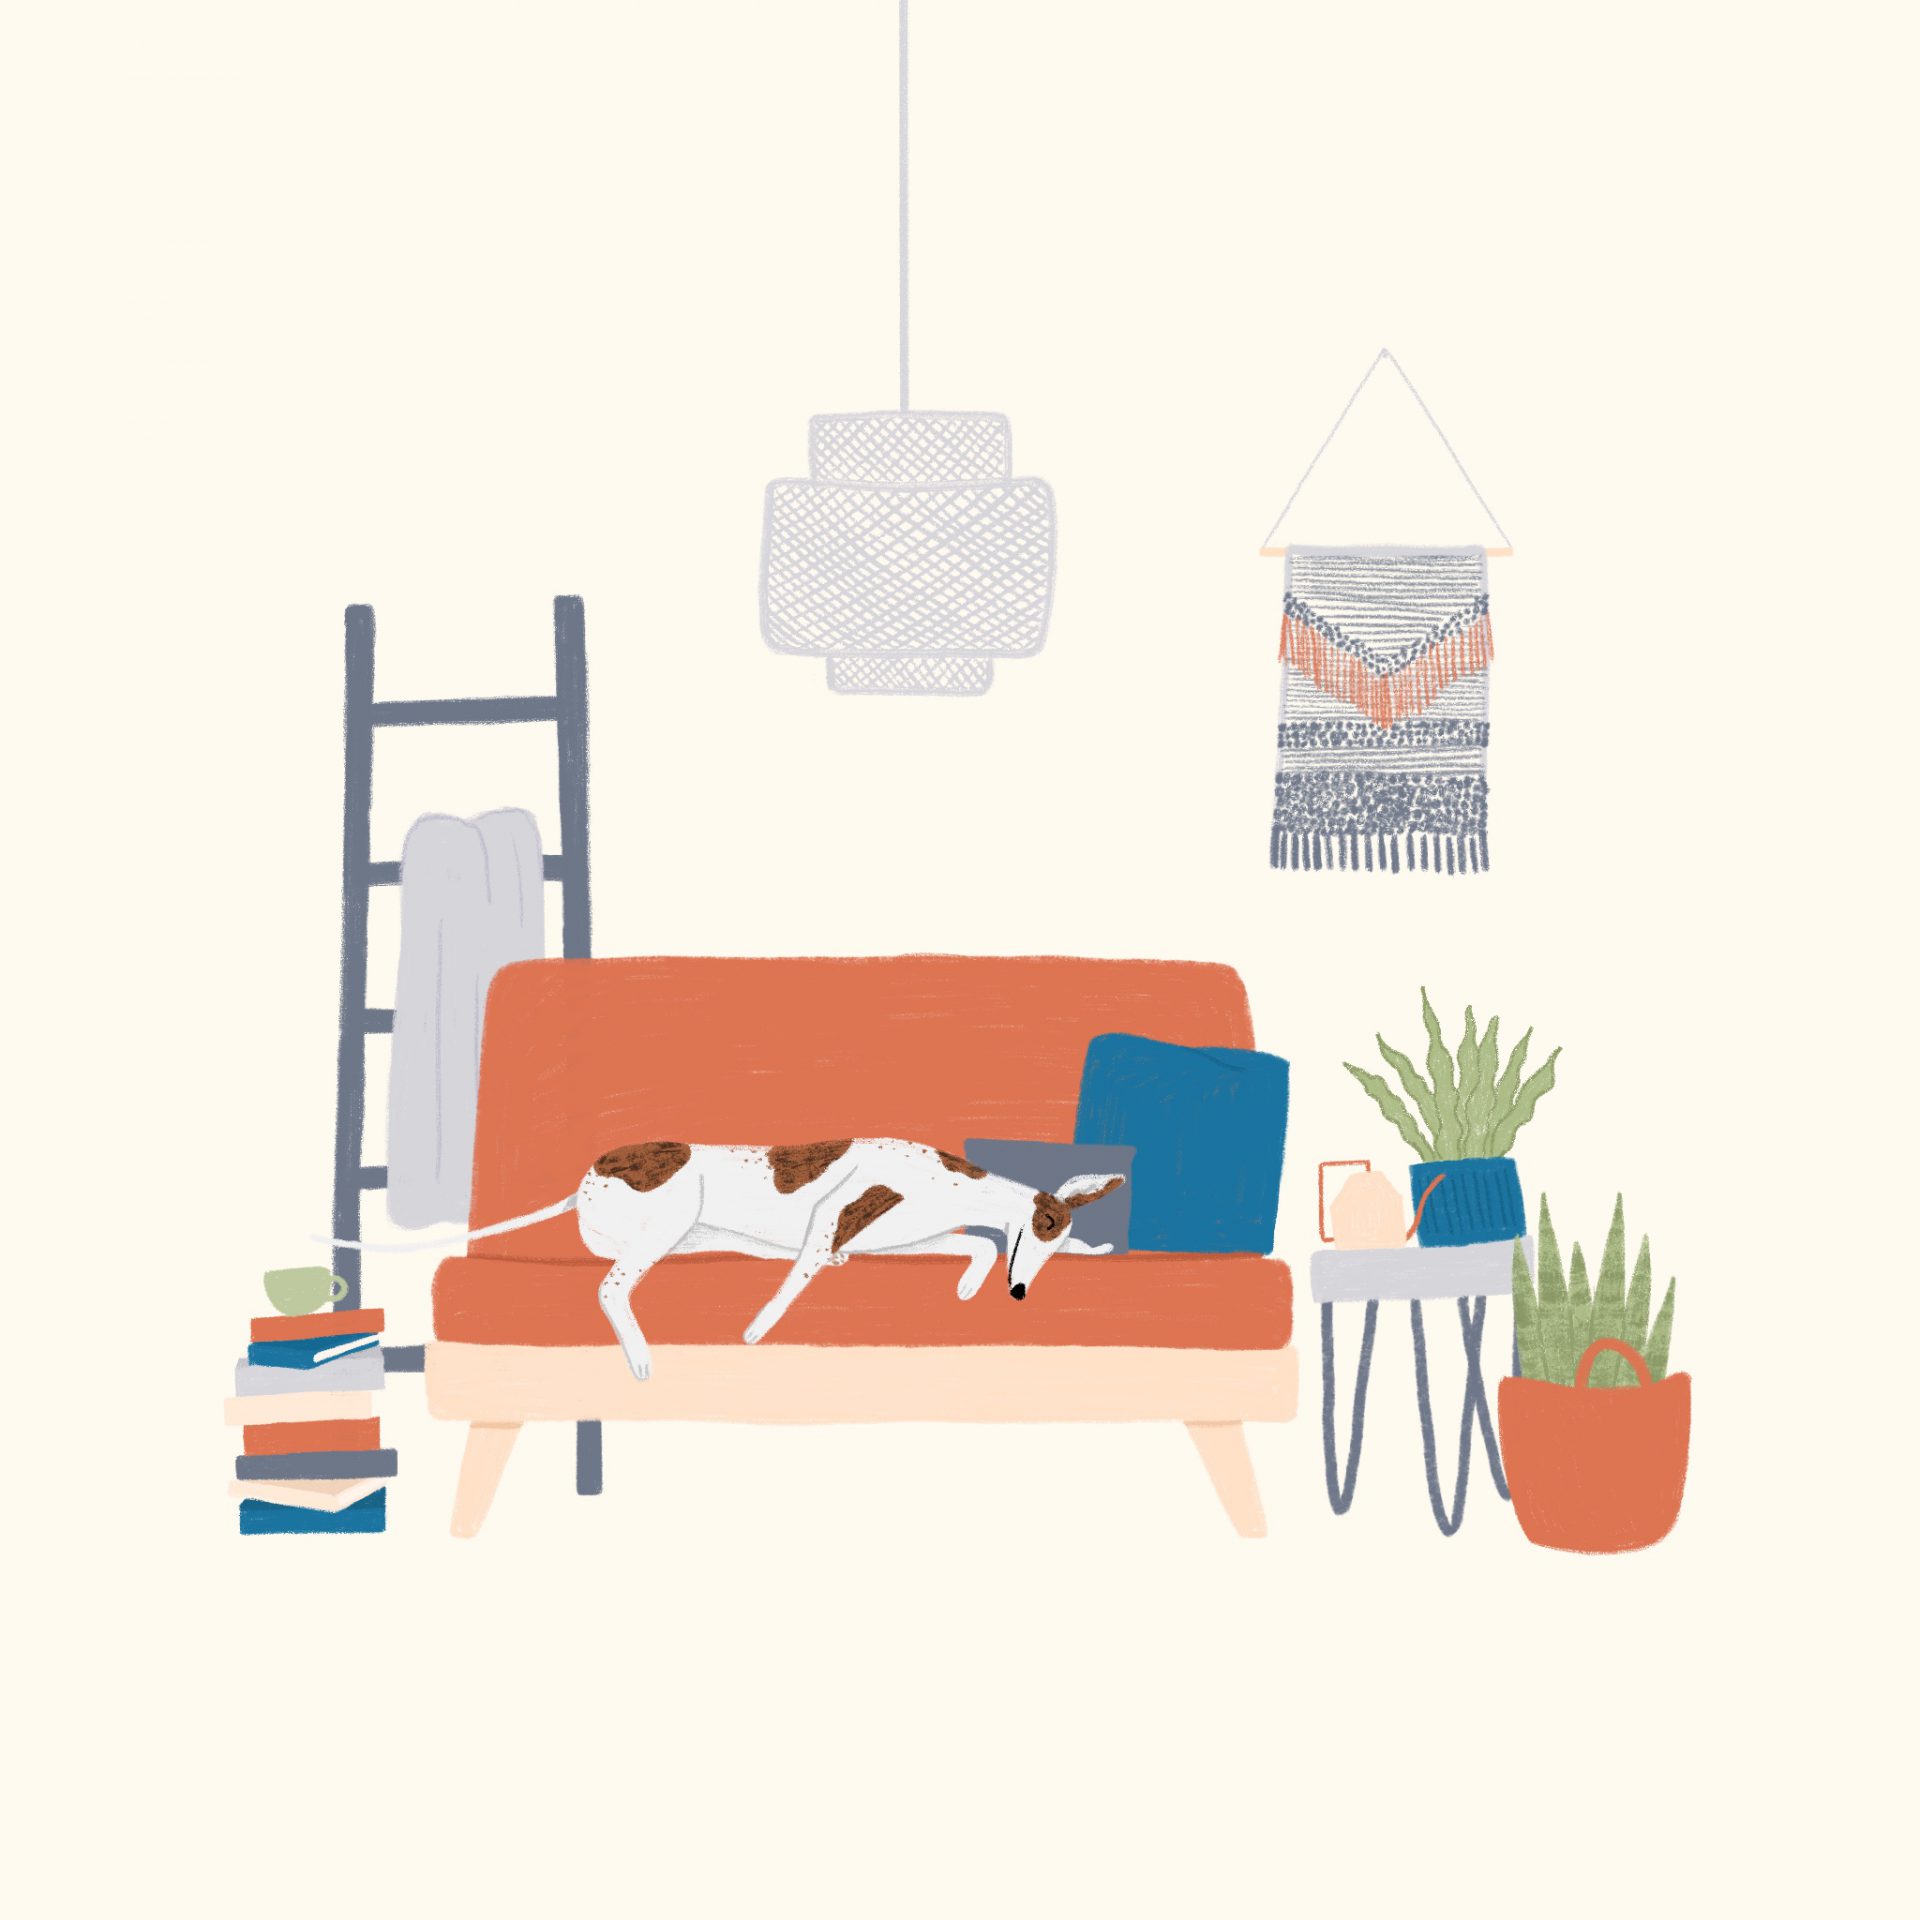 Illustration of a greyhound in a living room